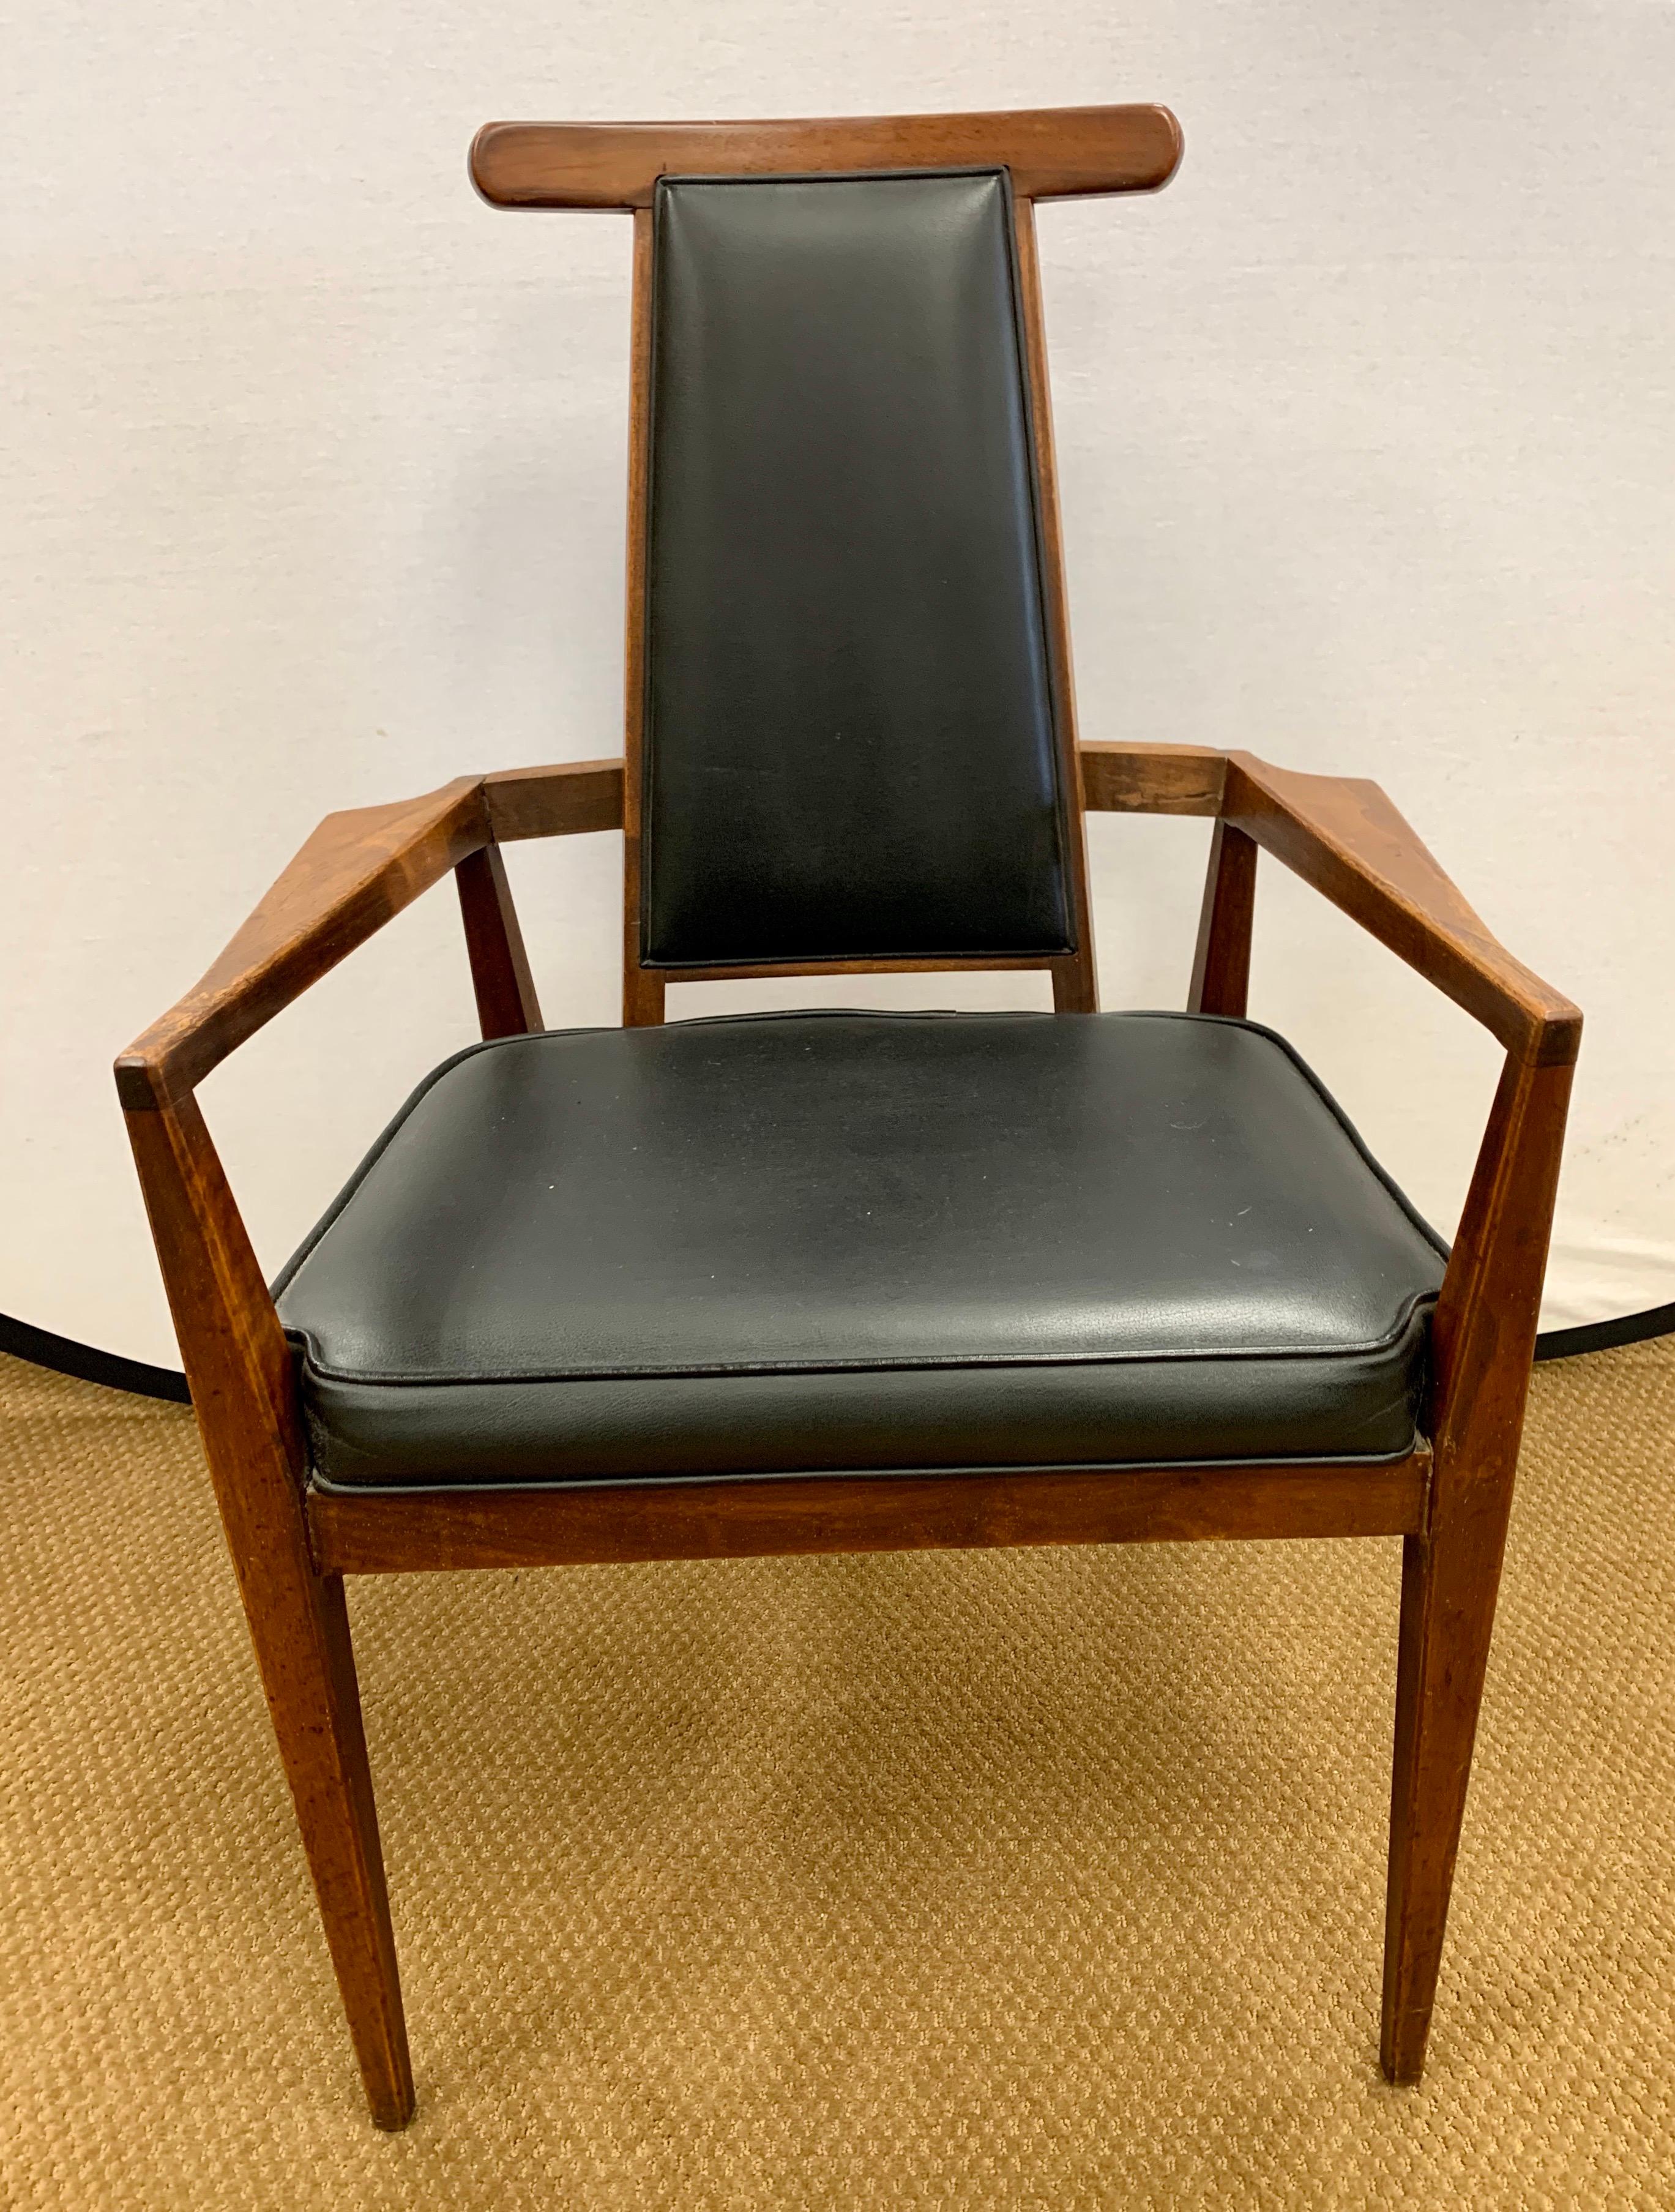 Rare set of five Foster-McDavid Ox dining chairs with walnut frames and black vinyl fabric that is not only original but still in great condition. Foster-McDavid was based in Florida and custom made these chairs for clients in the 1950s. The 